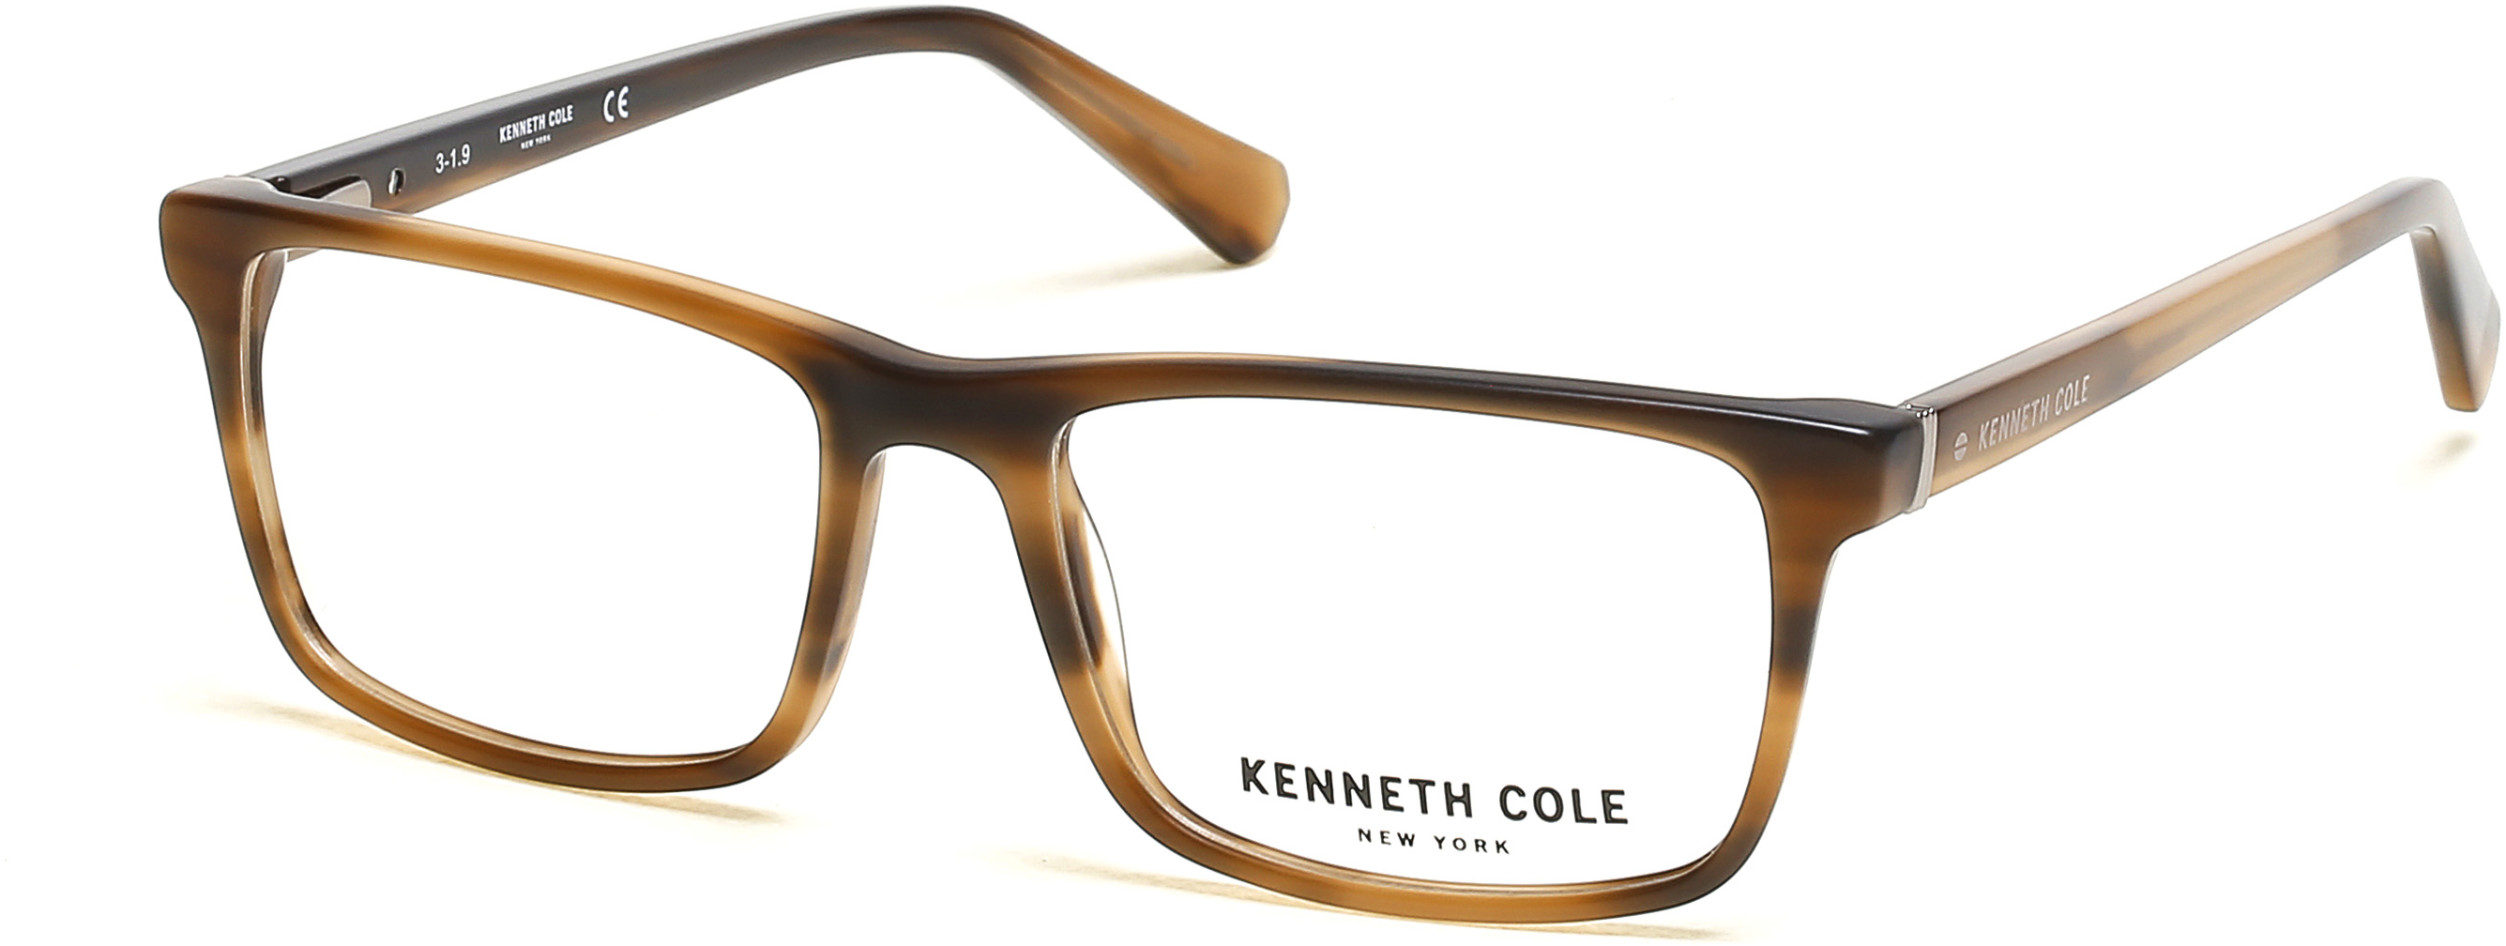 KENNETH COLE NY 0300 049